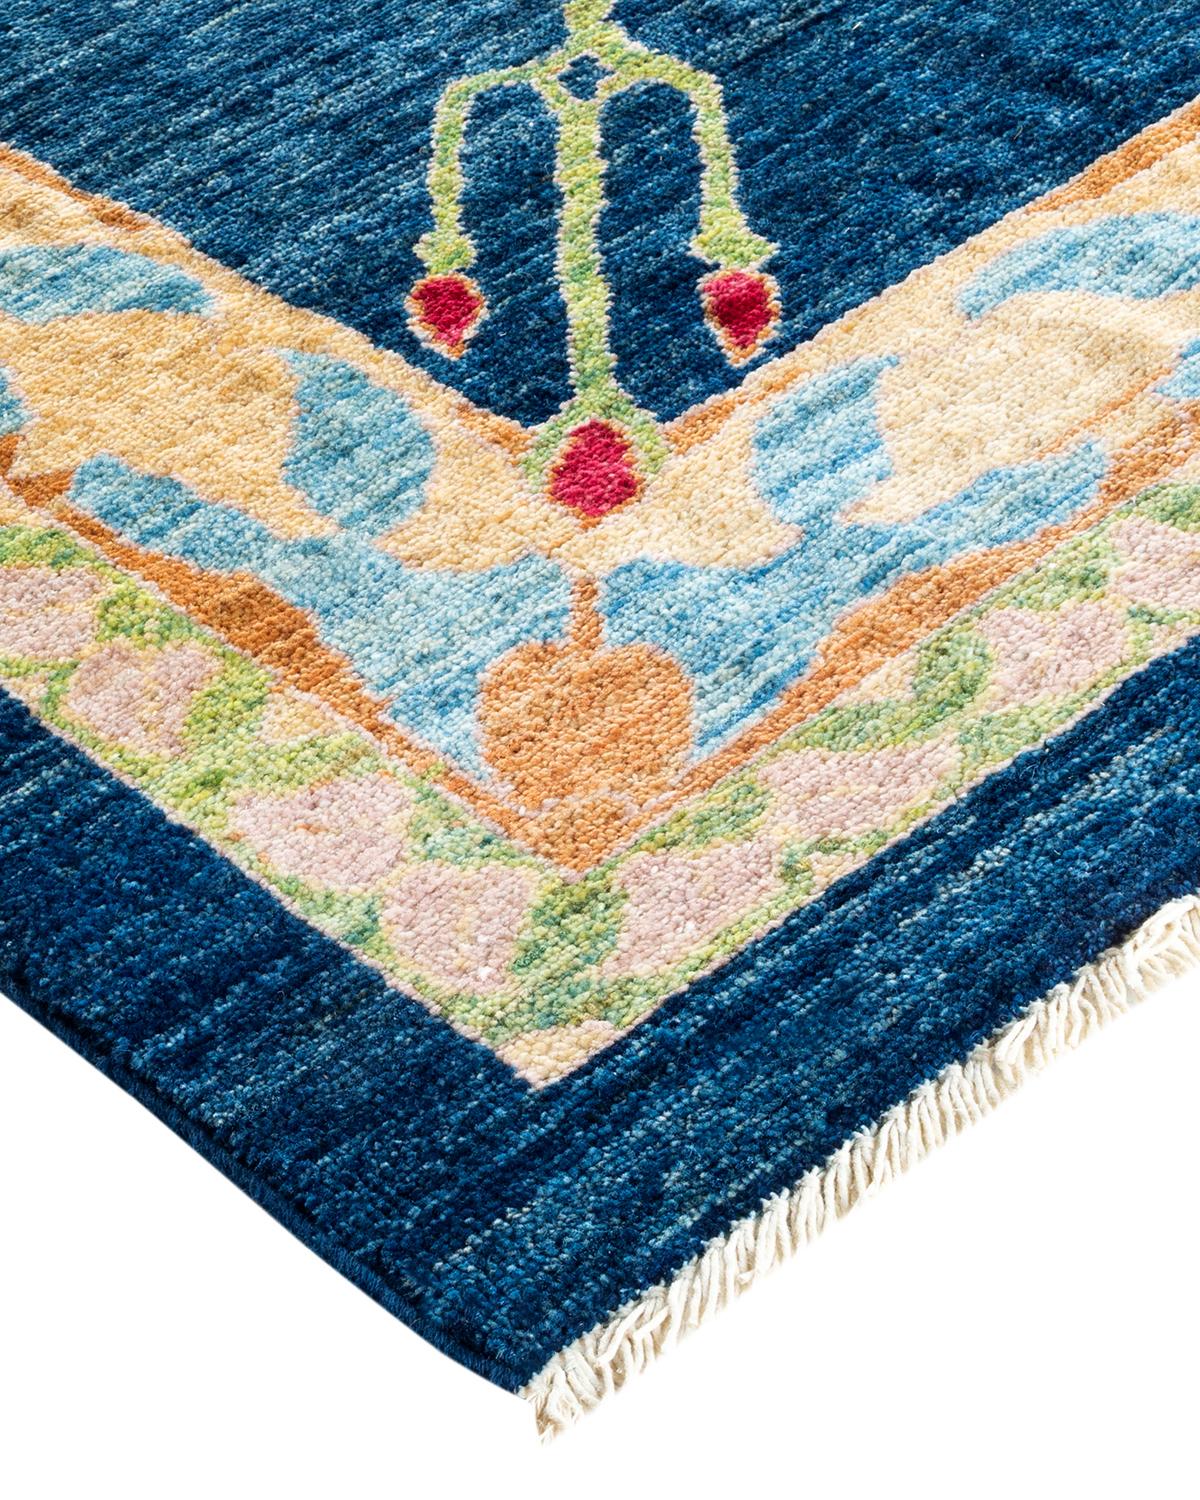 The meticulous art of hand-embroidered textiles from Uzbekistan tribes inspired the Suzani Collection of rugs. Bold motifs, particularly pomegranates, the sun, and the moon, are frequent elements, their simple yet compelling designs made even more